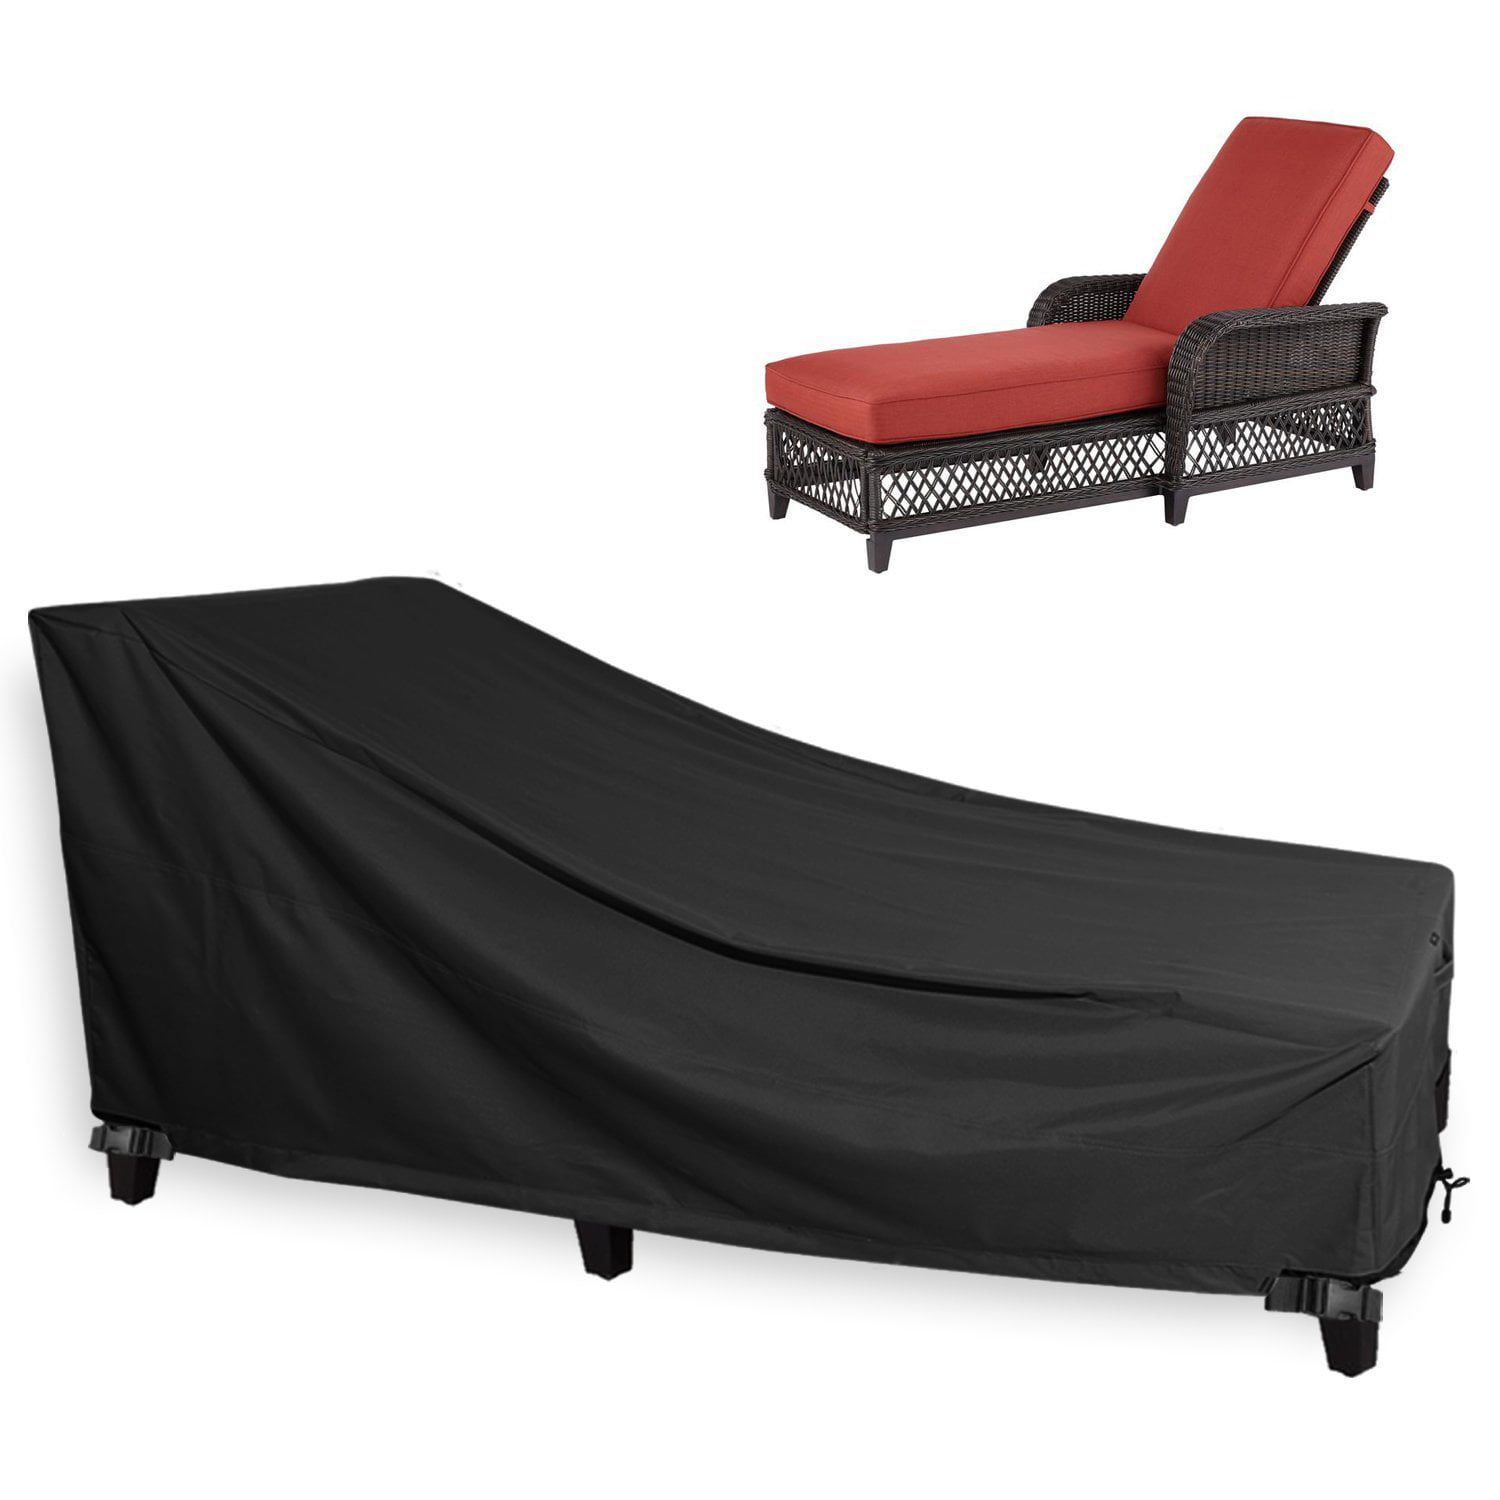 82'' x 30'' x 31'' Outdoor Patio Chaise Lounge Chair Cover, Heavy Duty